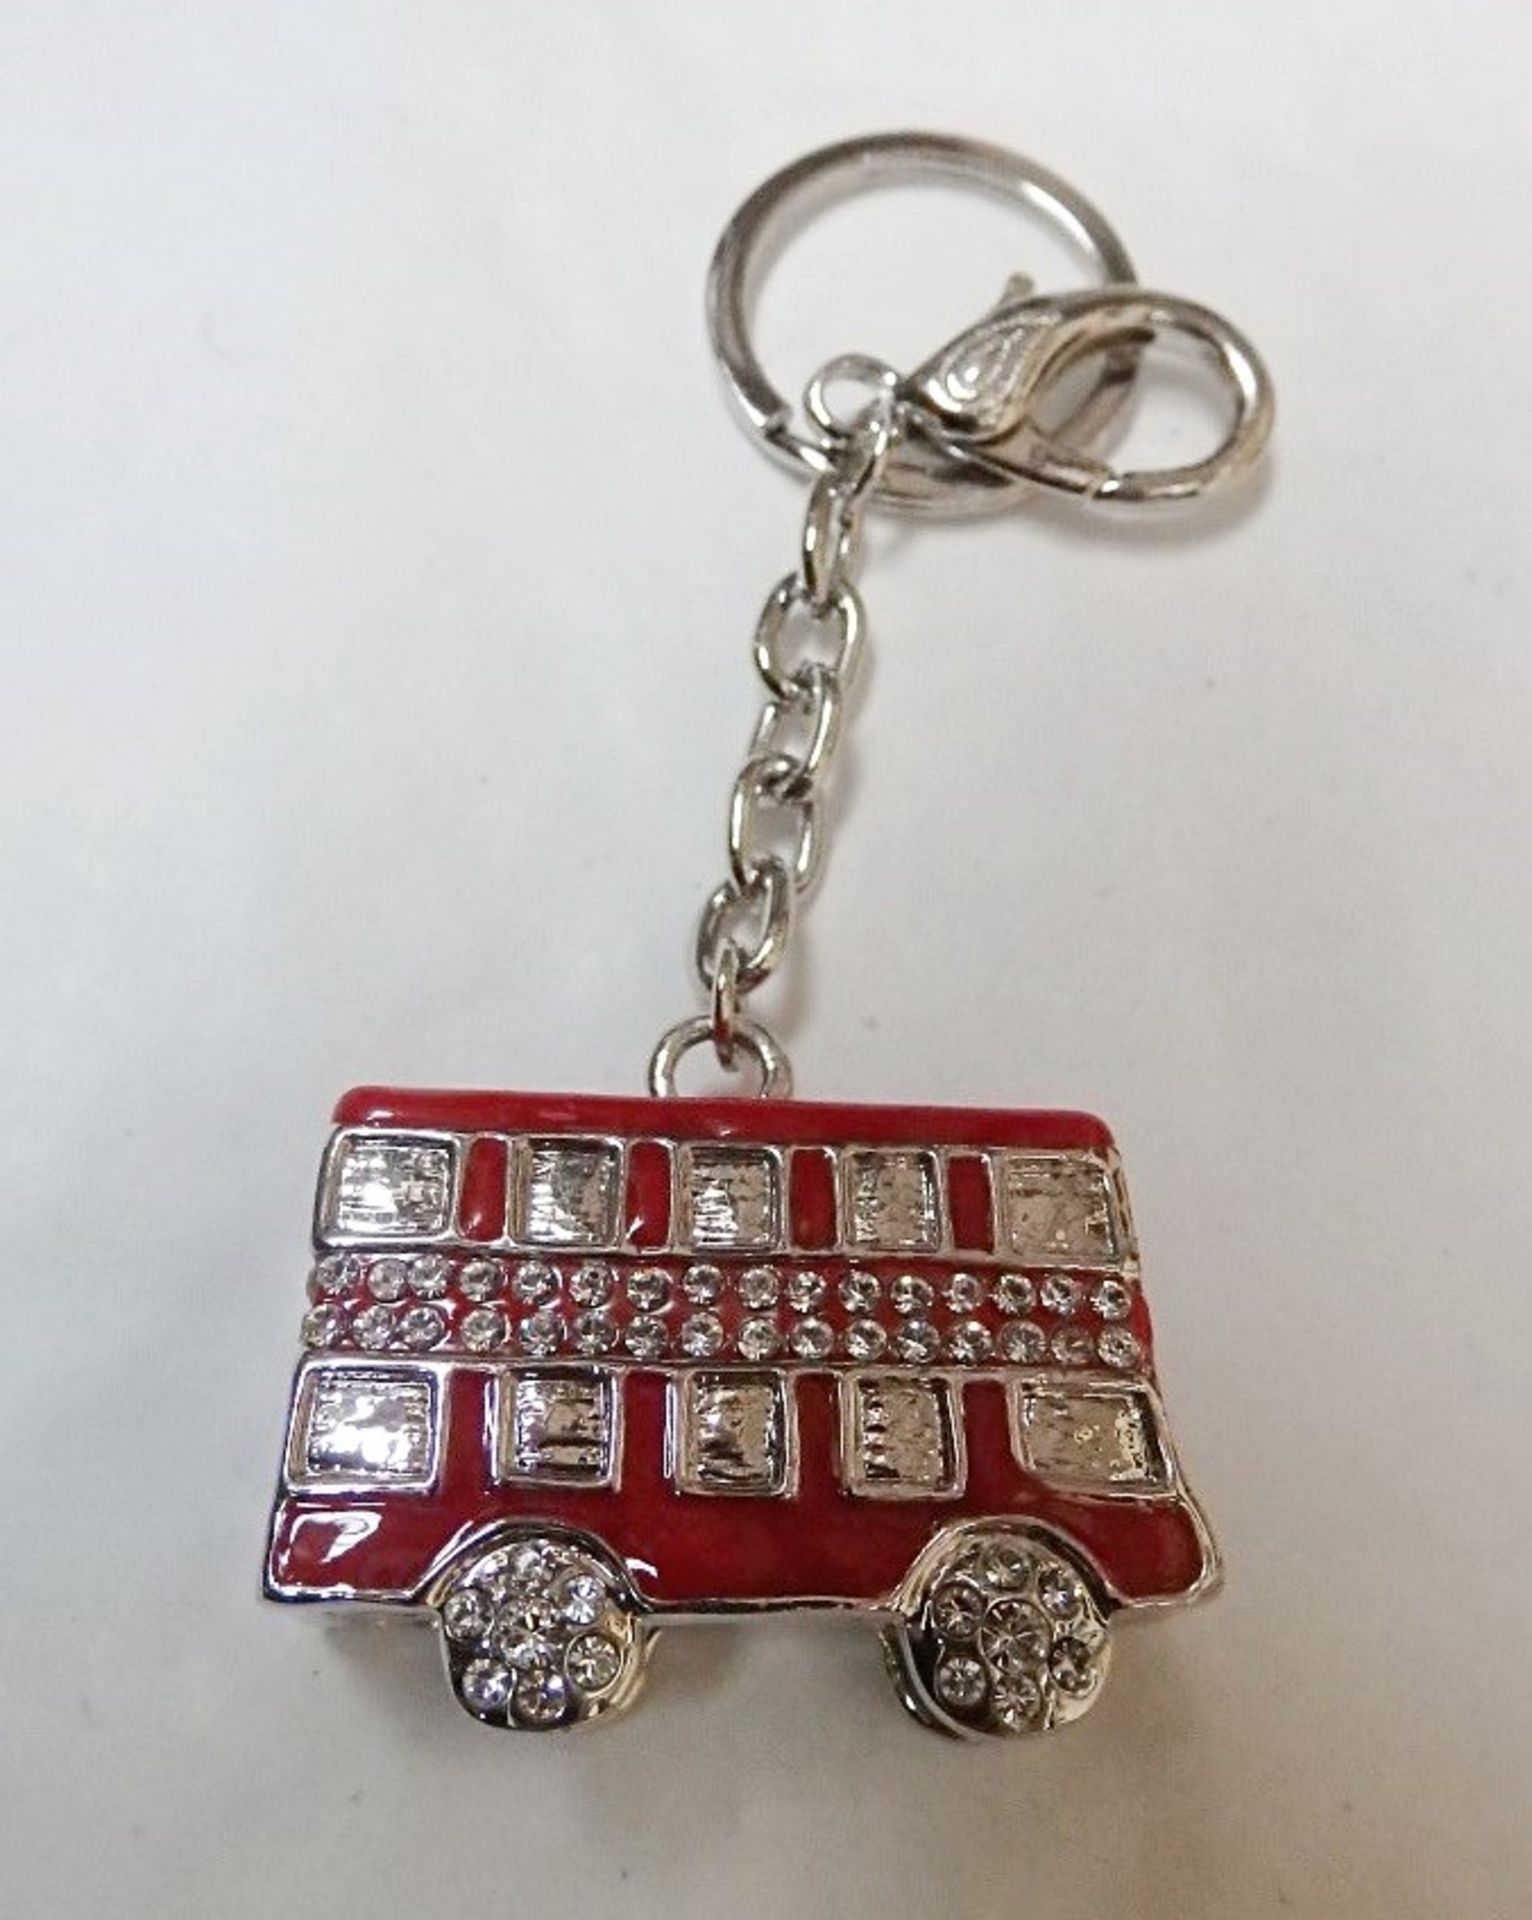 10 x Assorted ICE LONDON Key Rings with - Brand New, Genuine Unboxed Stock - MADE WITH SWAROVSKI - Image 2 of 5